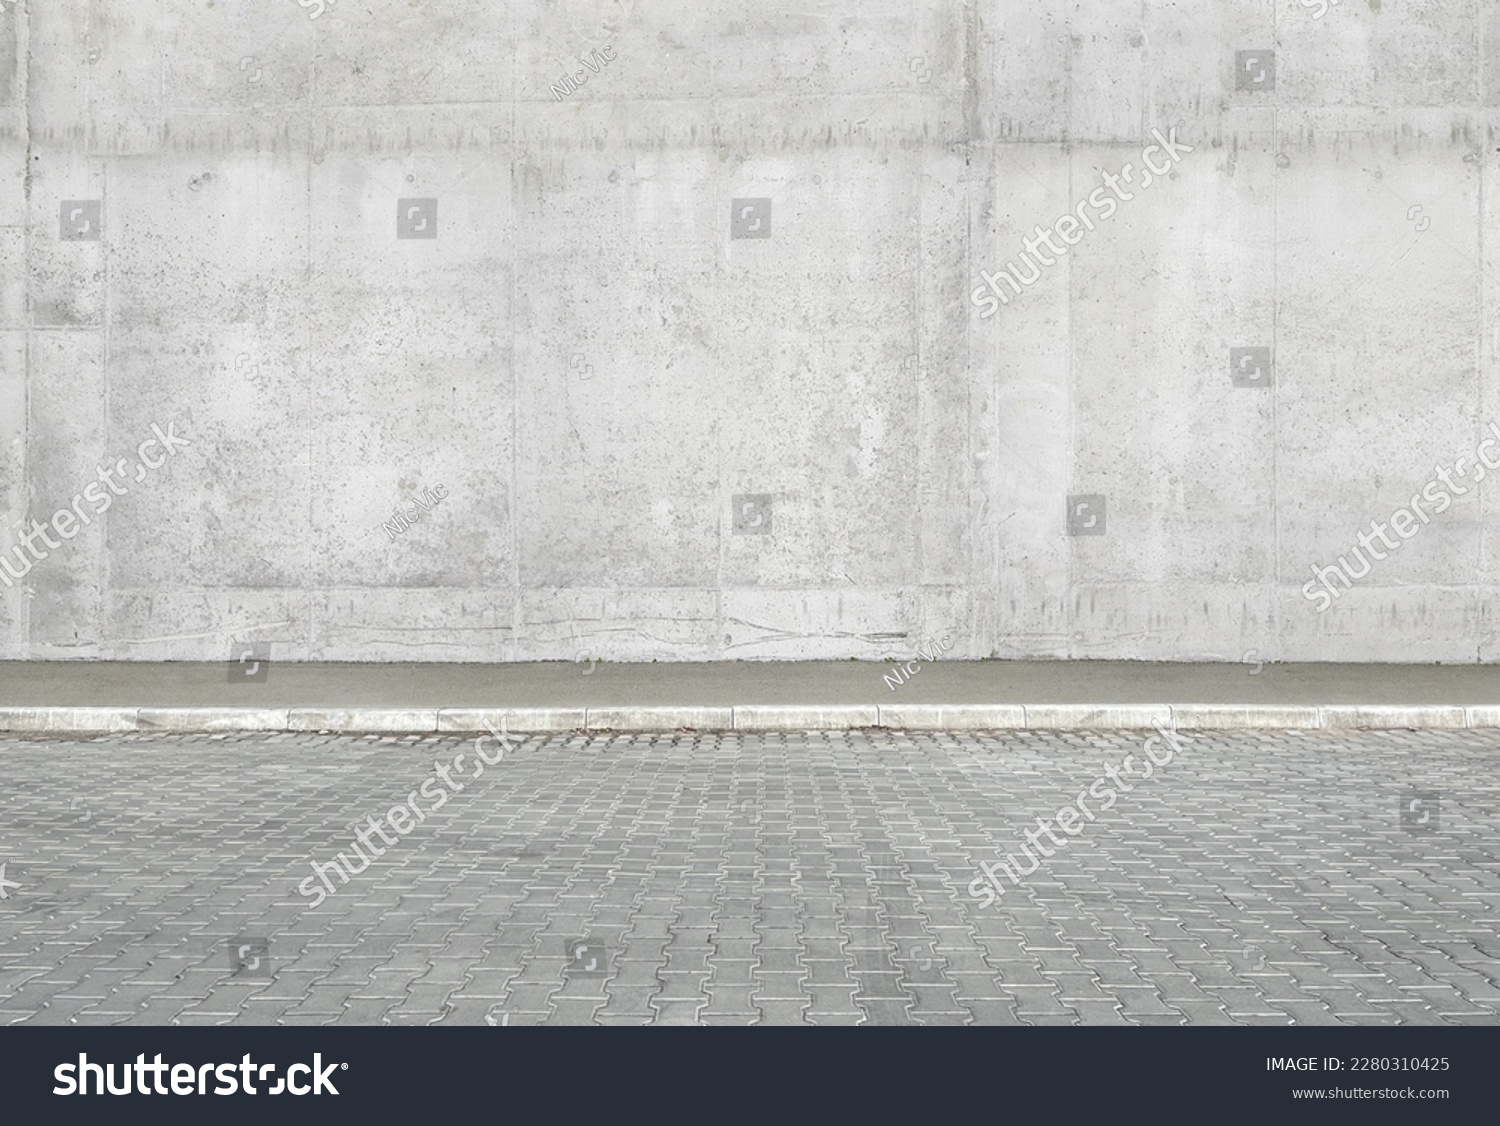 a fragment of a street city concrete wall of a building and an paving stones. Building's facade. Mocap or background for creativity #2280310425